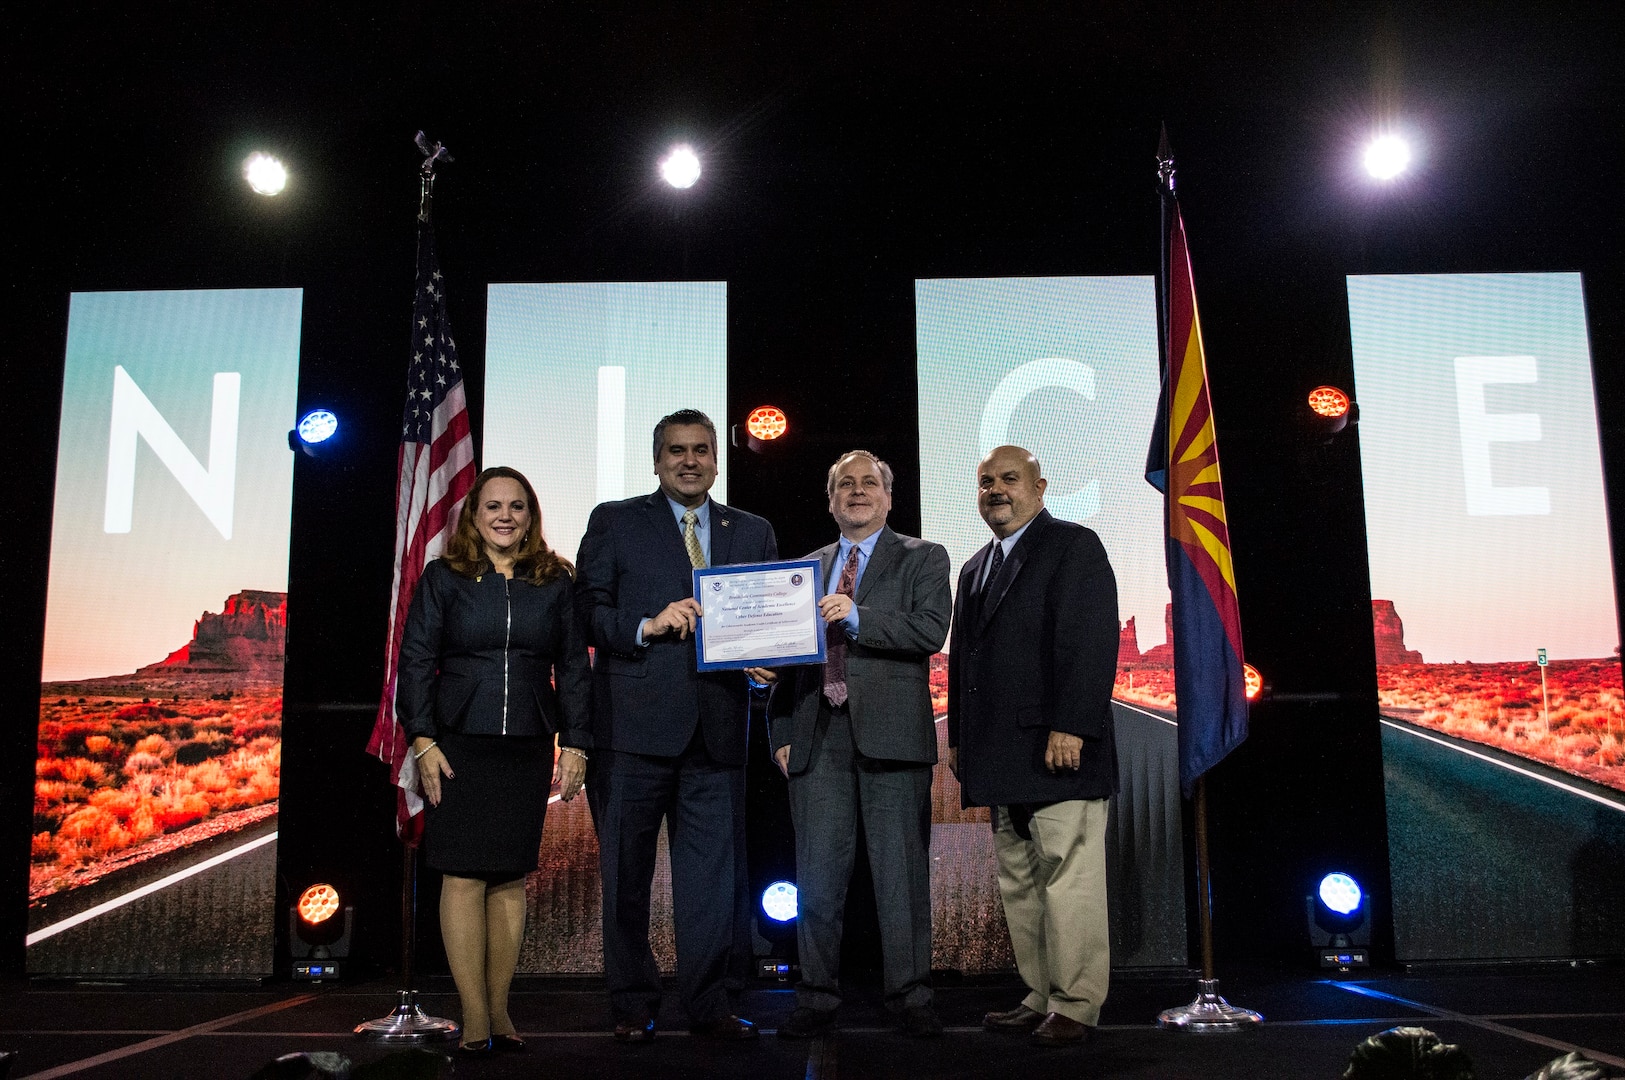 Brookdale Community College was among the academic institutions recognized during the November 2019  NICE conference.  Left to right - Diane M. Janosek, Dr. David Stout - President, Brookdale Community College, Michael Quissaunee - Chair and Professor, Engineering and Technology Department, and Keith Holternmann, Chief Learning Officer, Cybersecurity an Infrastructure Security Agency (CISA/DHS).